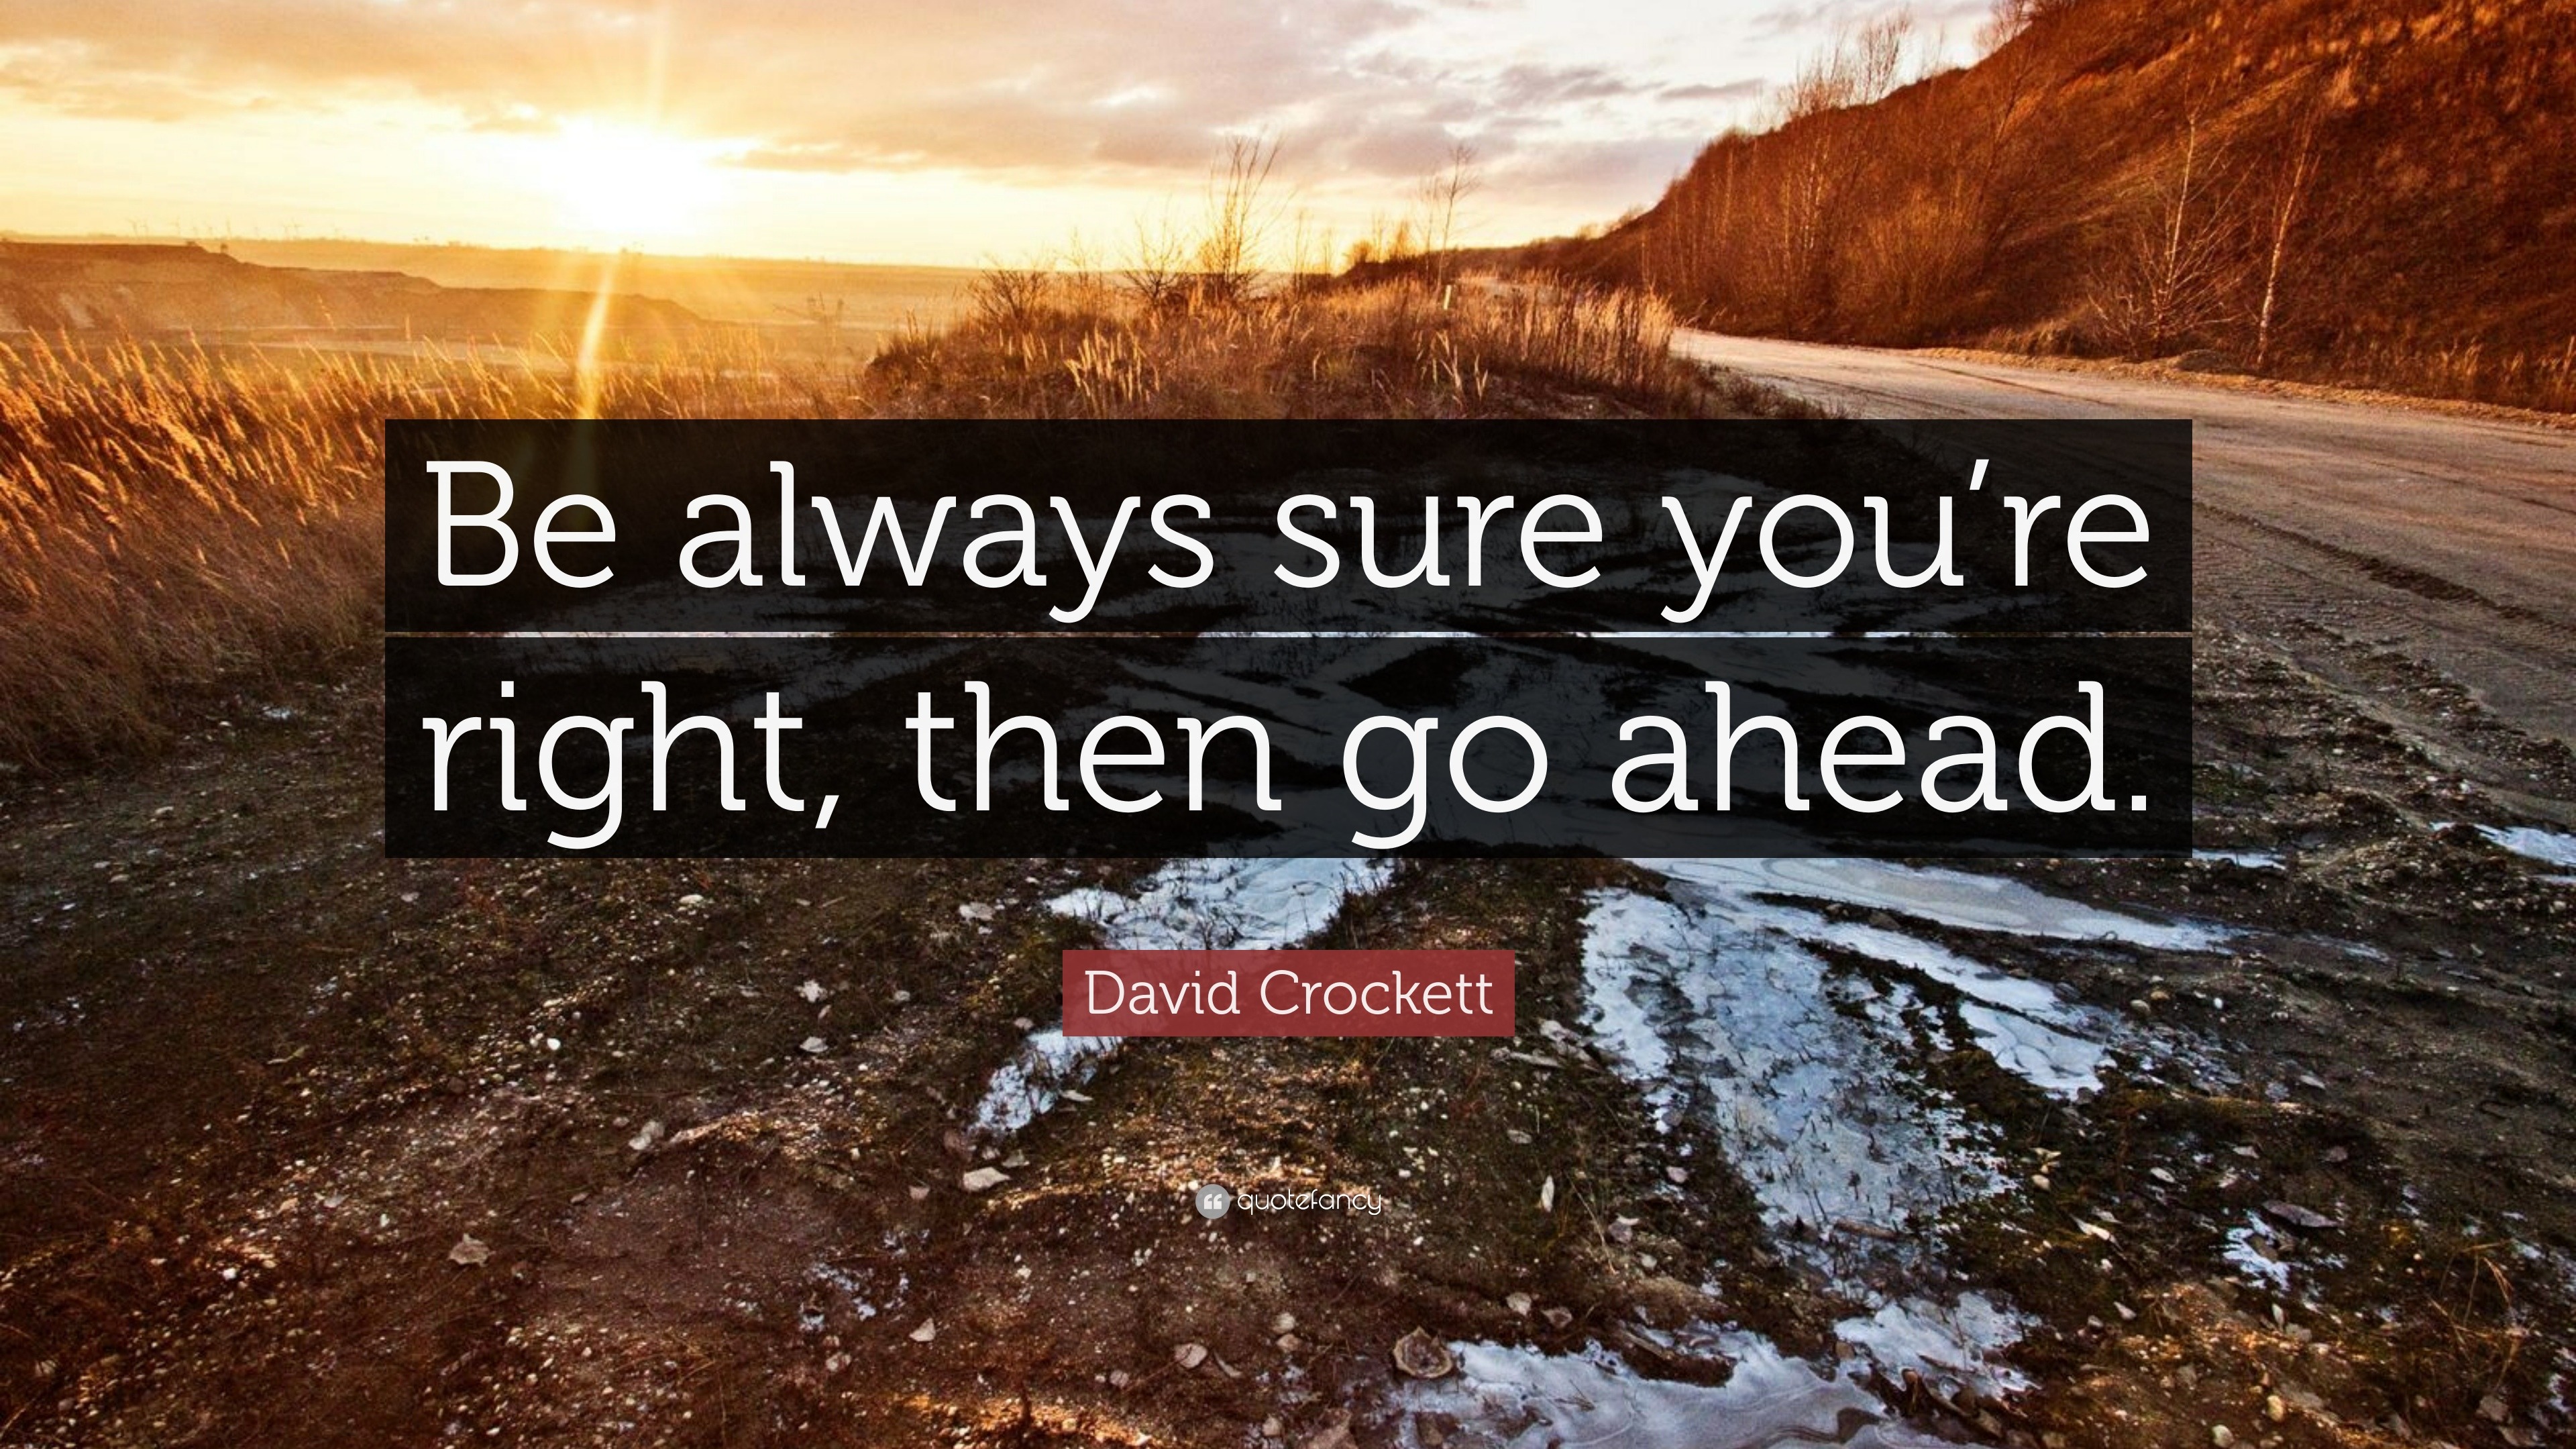 David Crockett Quote: “Be always sure you’re right, then go ahead.”